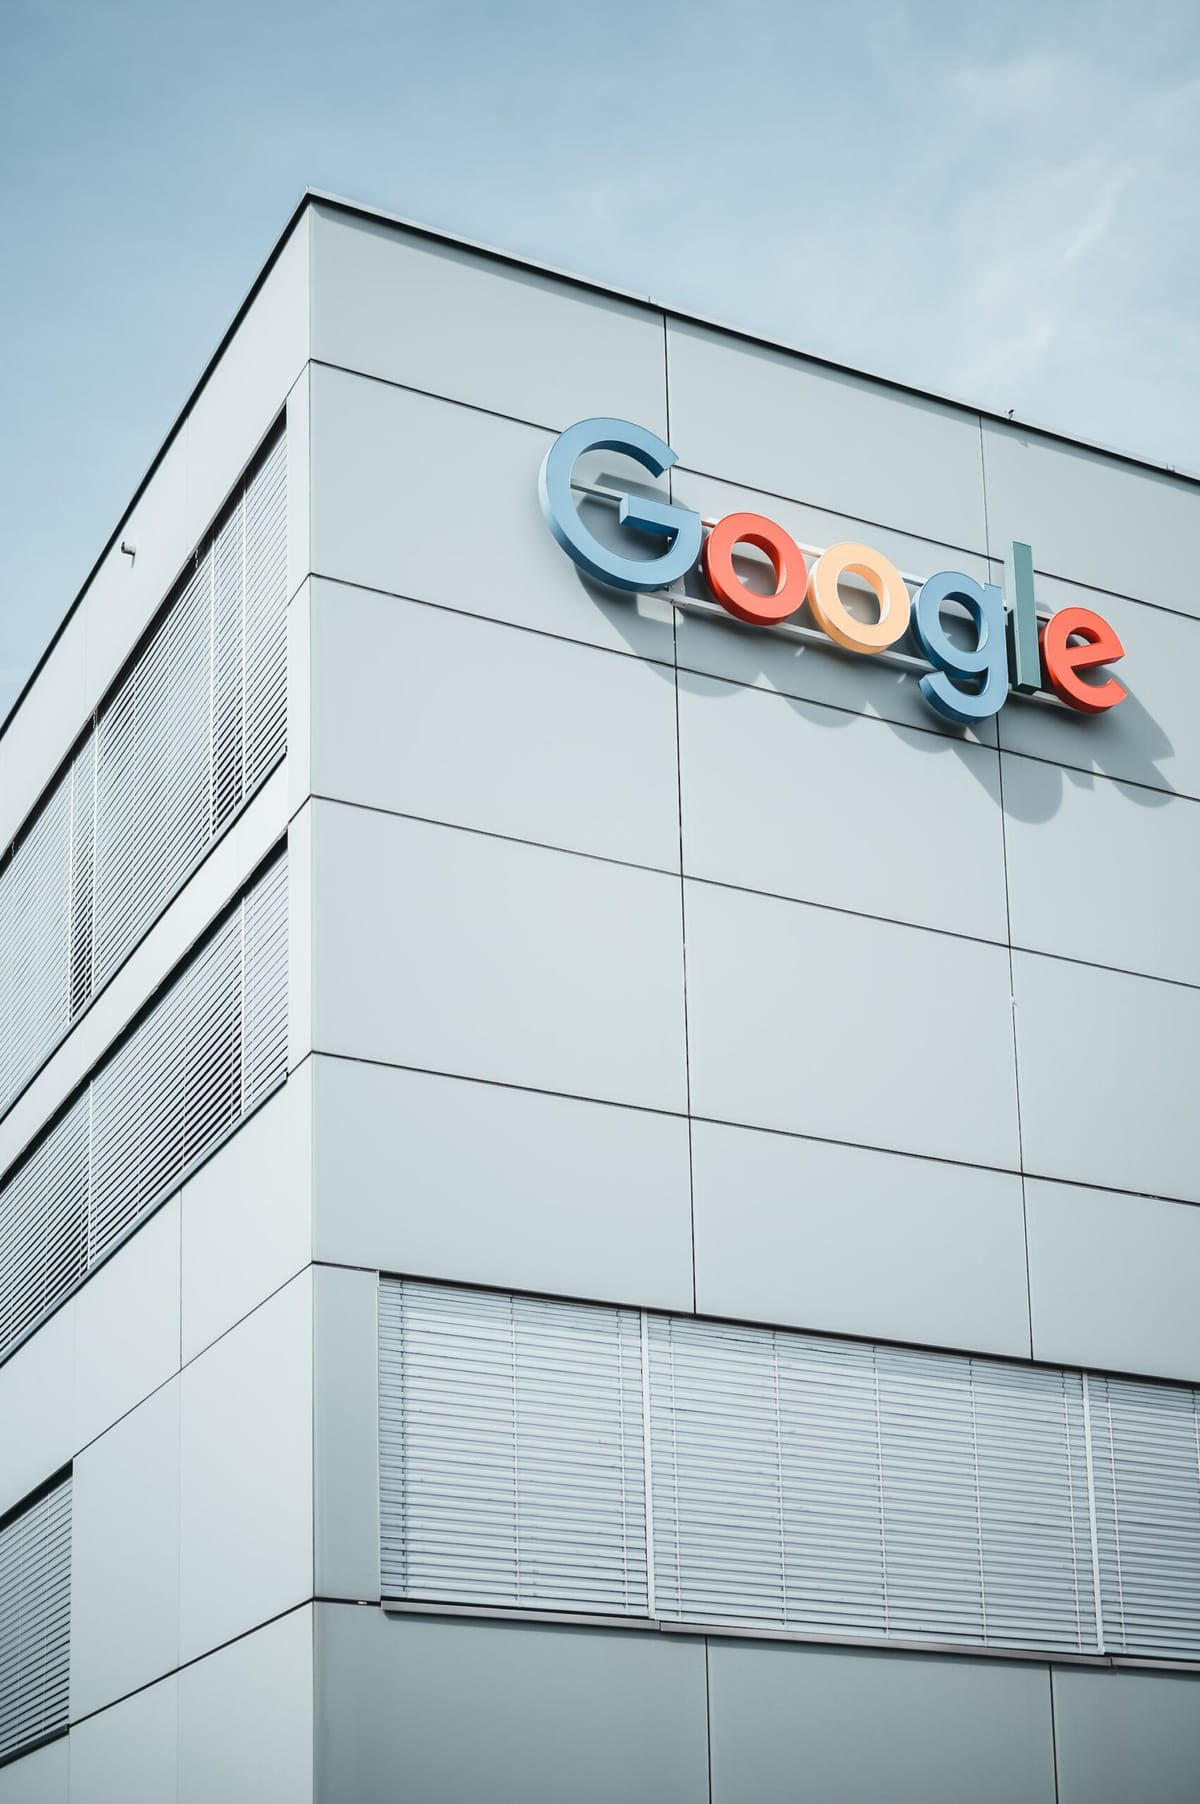 Google Sued for Forcing Interns to Work in "Idea Chambers" AKA Sweat Shops